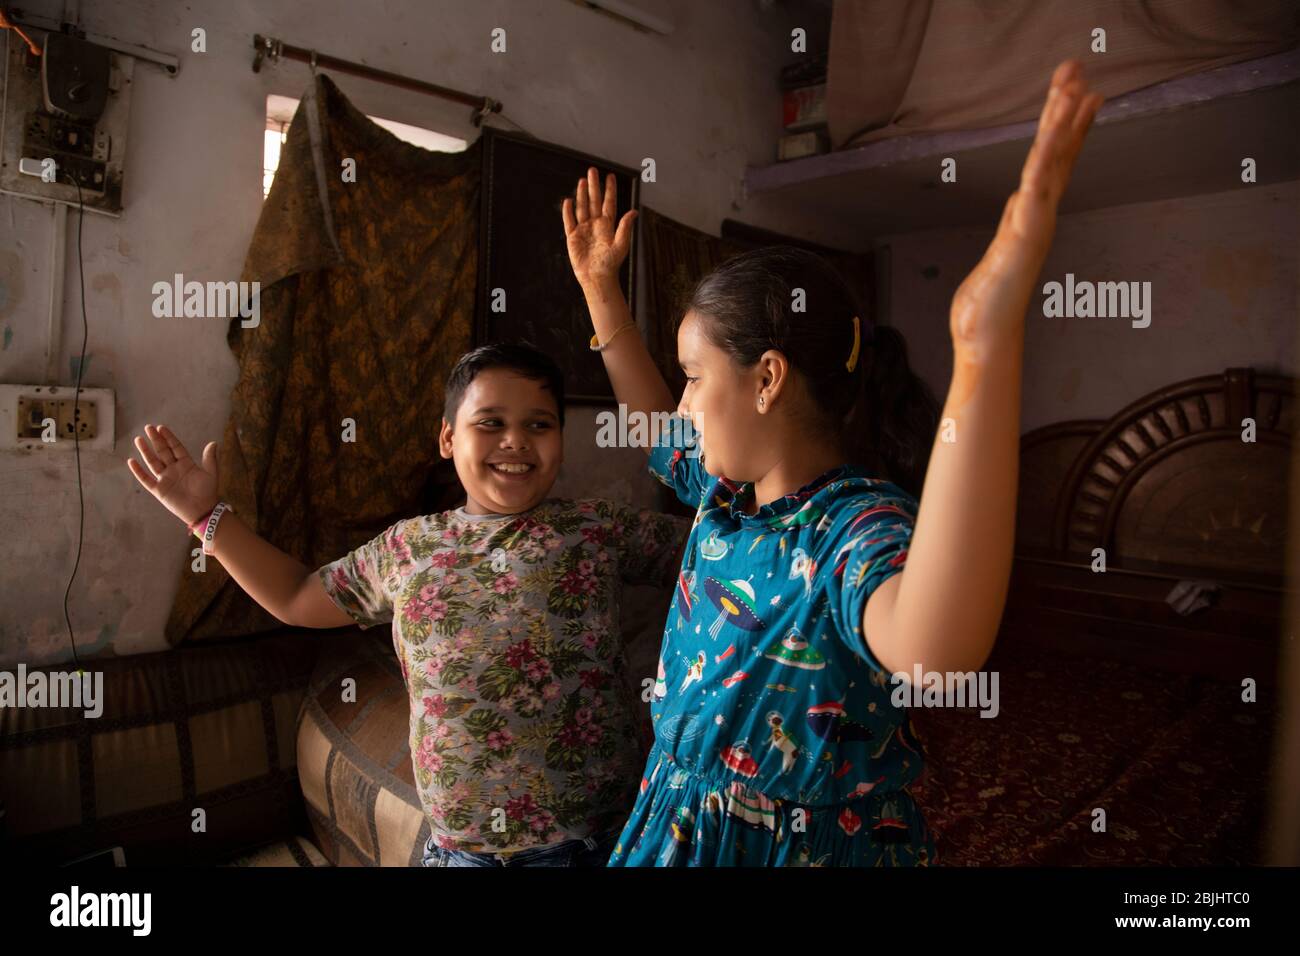 young brother and sister dancing at home Stock Photo